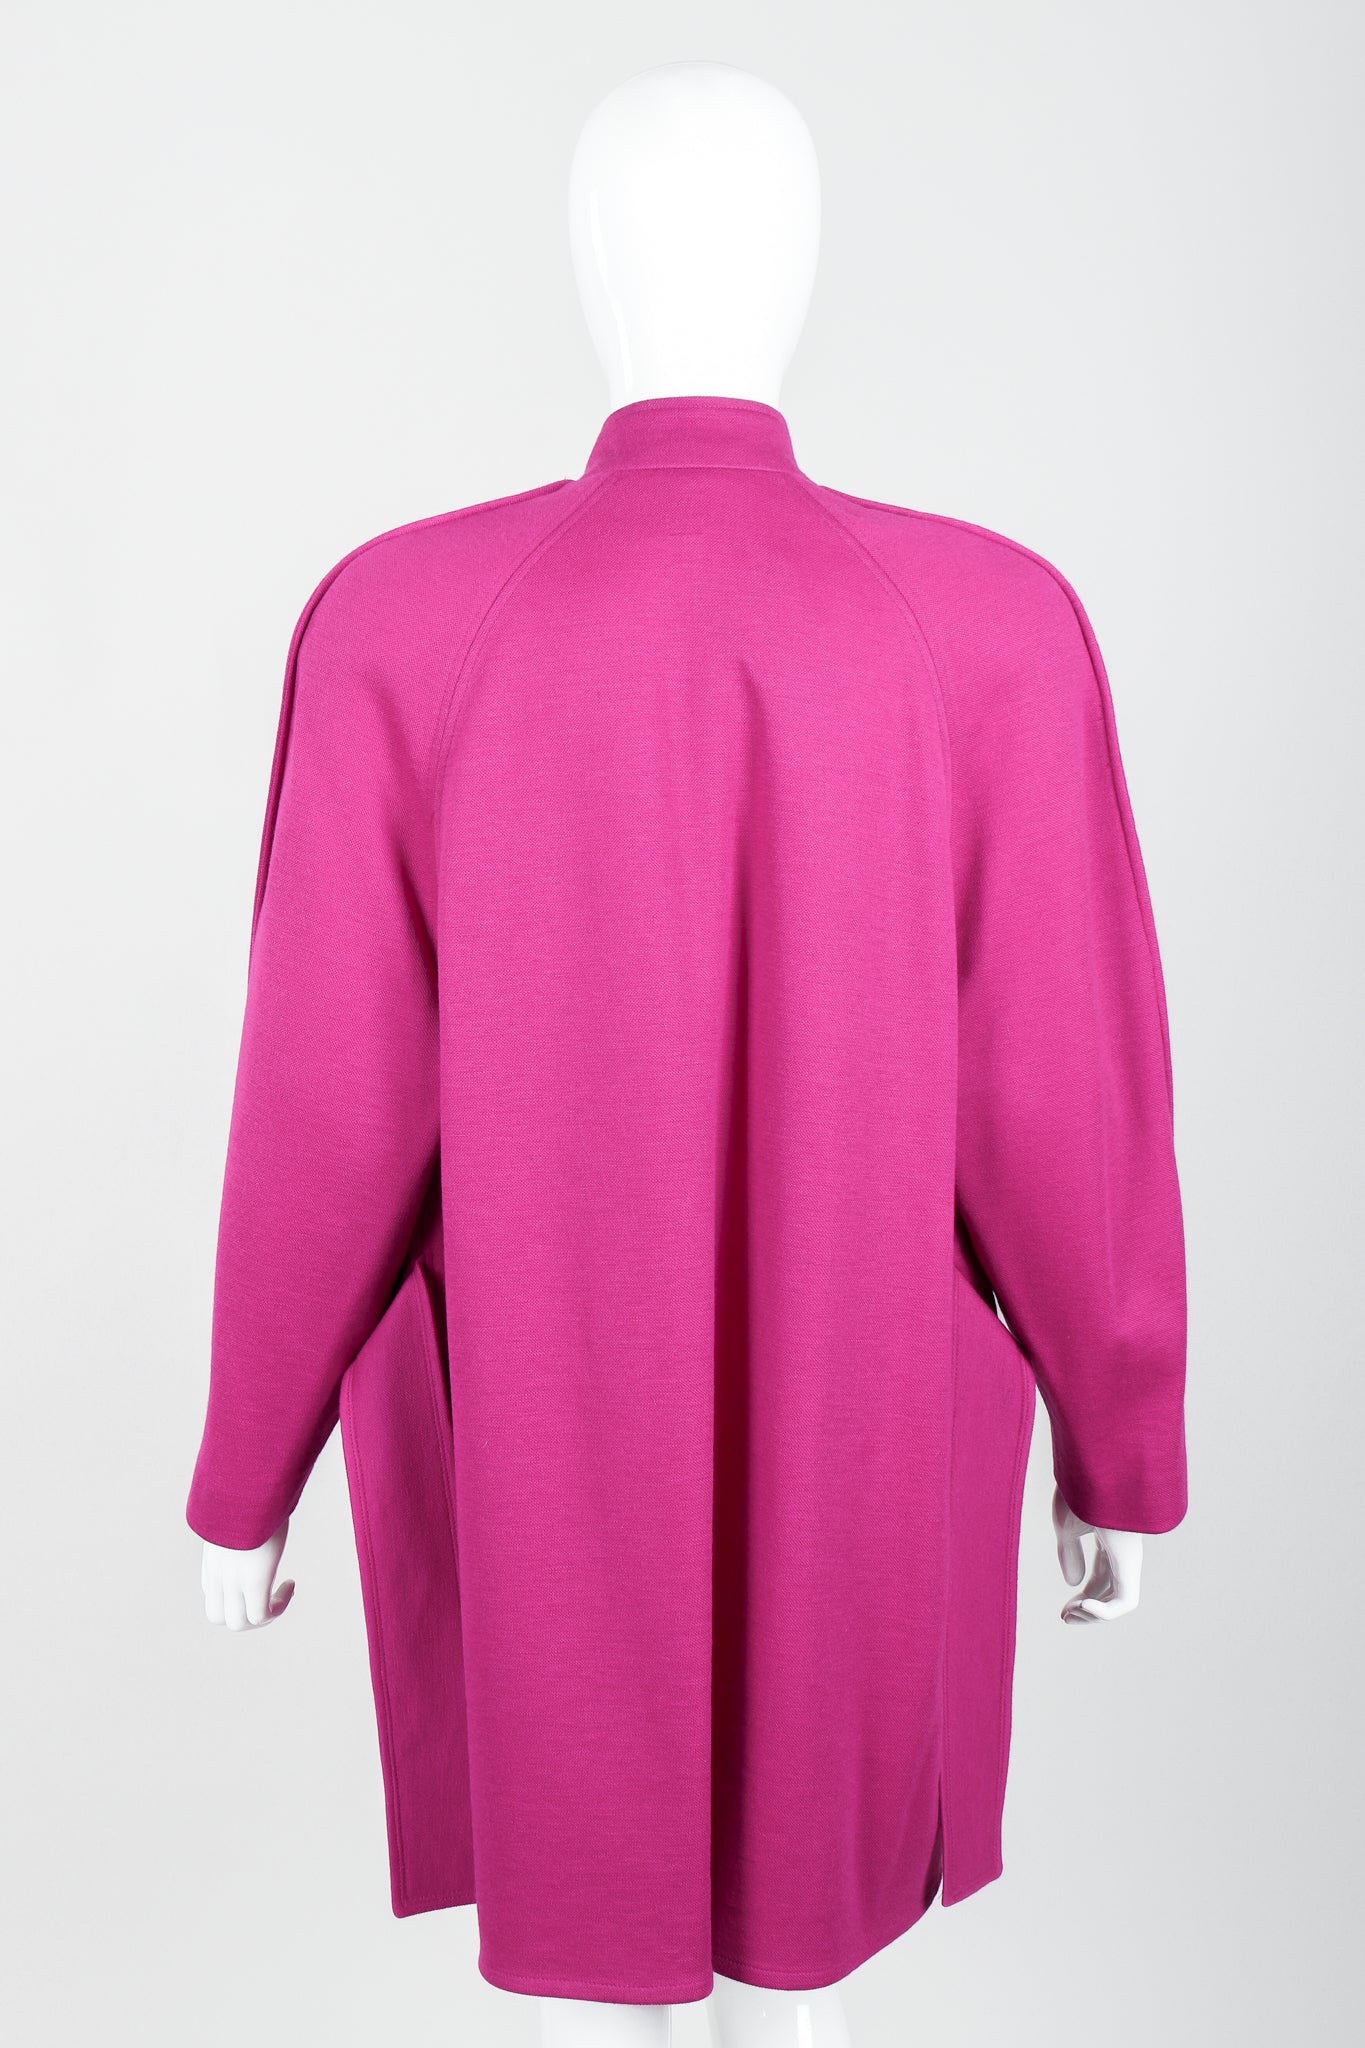 Vintage Sonia Rykiel Fuchsia Knit Cocoon Coat on mannequin back at Recess